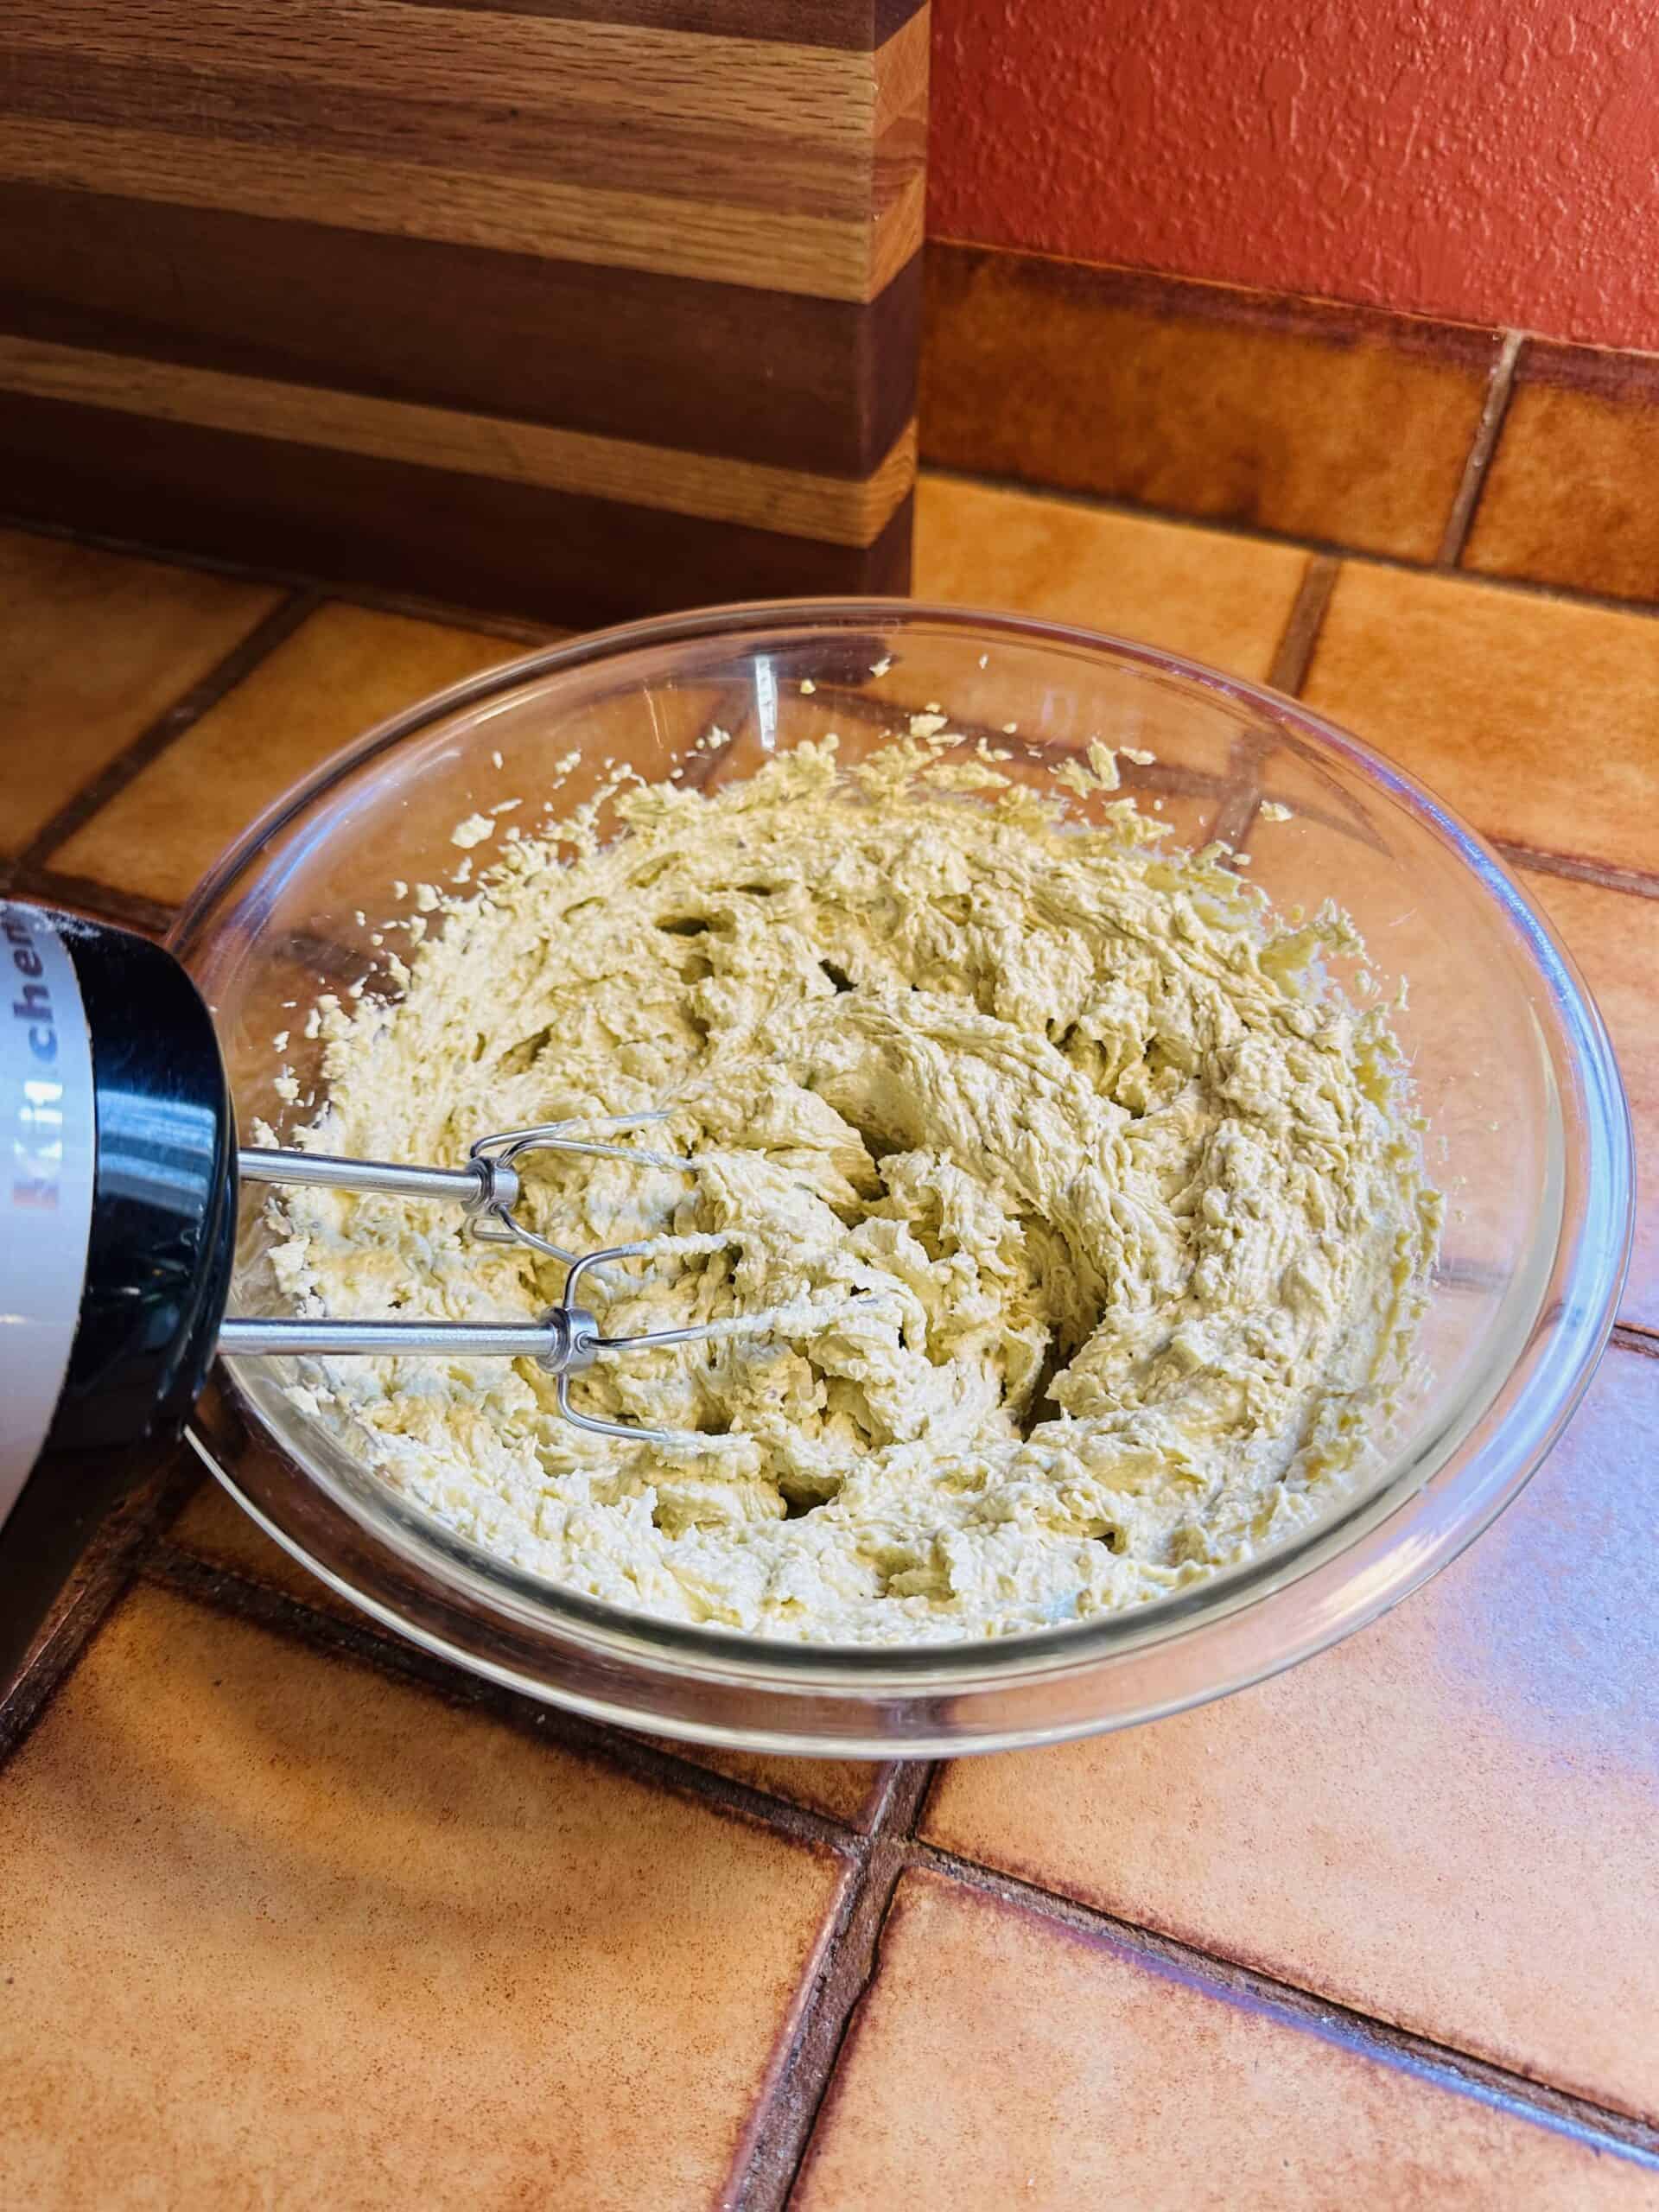 Pistachio buttercream in a glass bowl with an electric mixer.